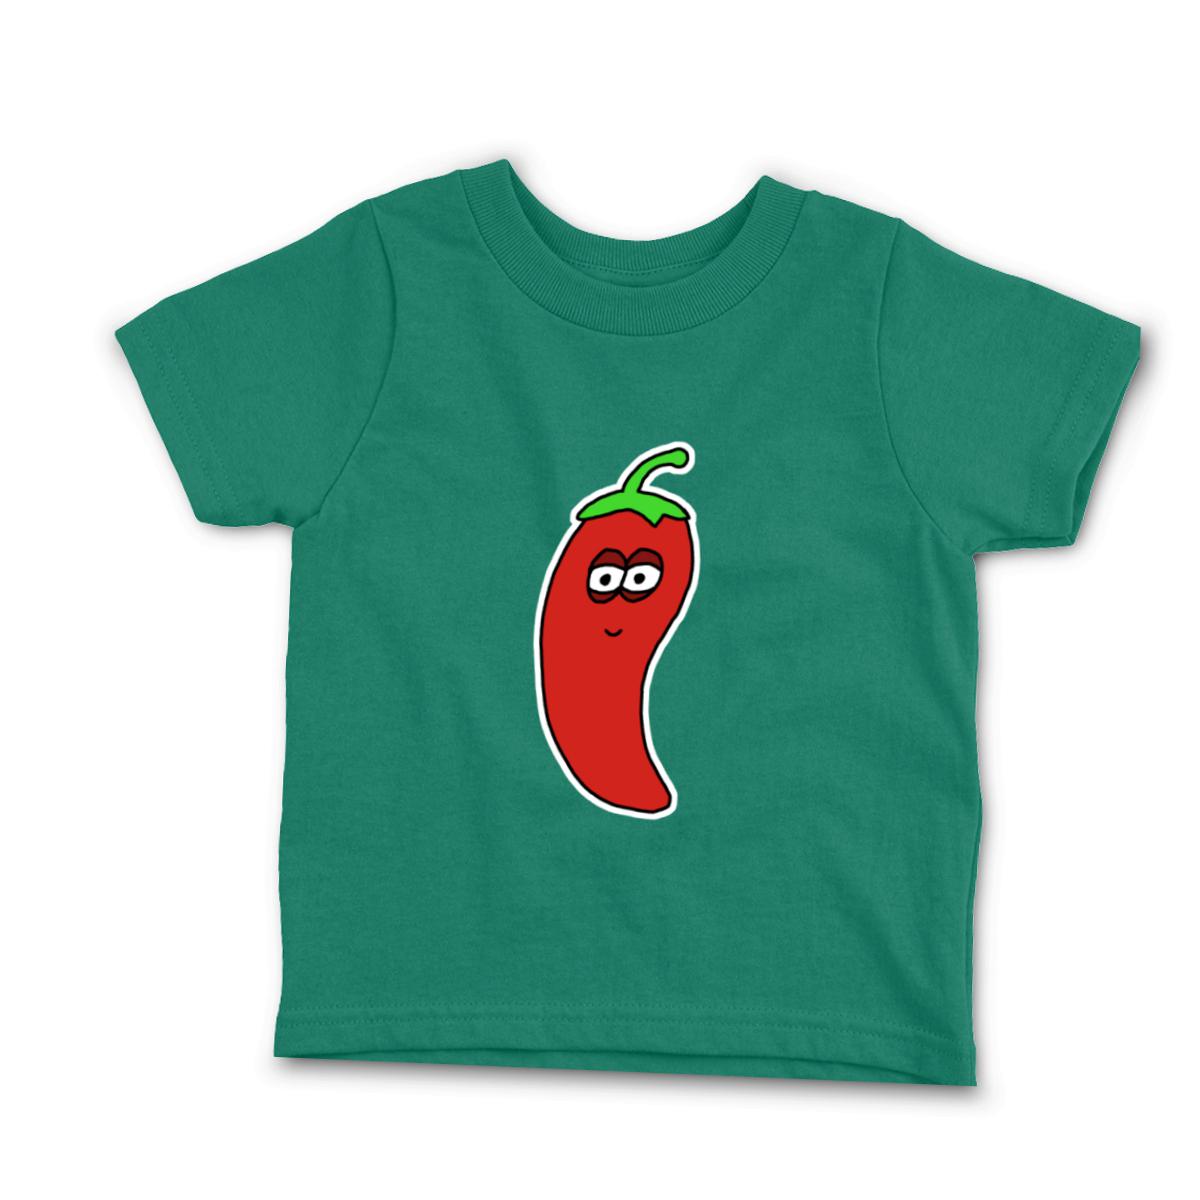 Chili Pepper Toddler Tee 4T kelly